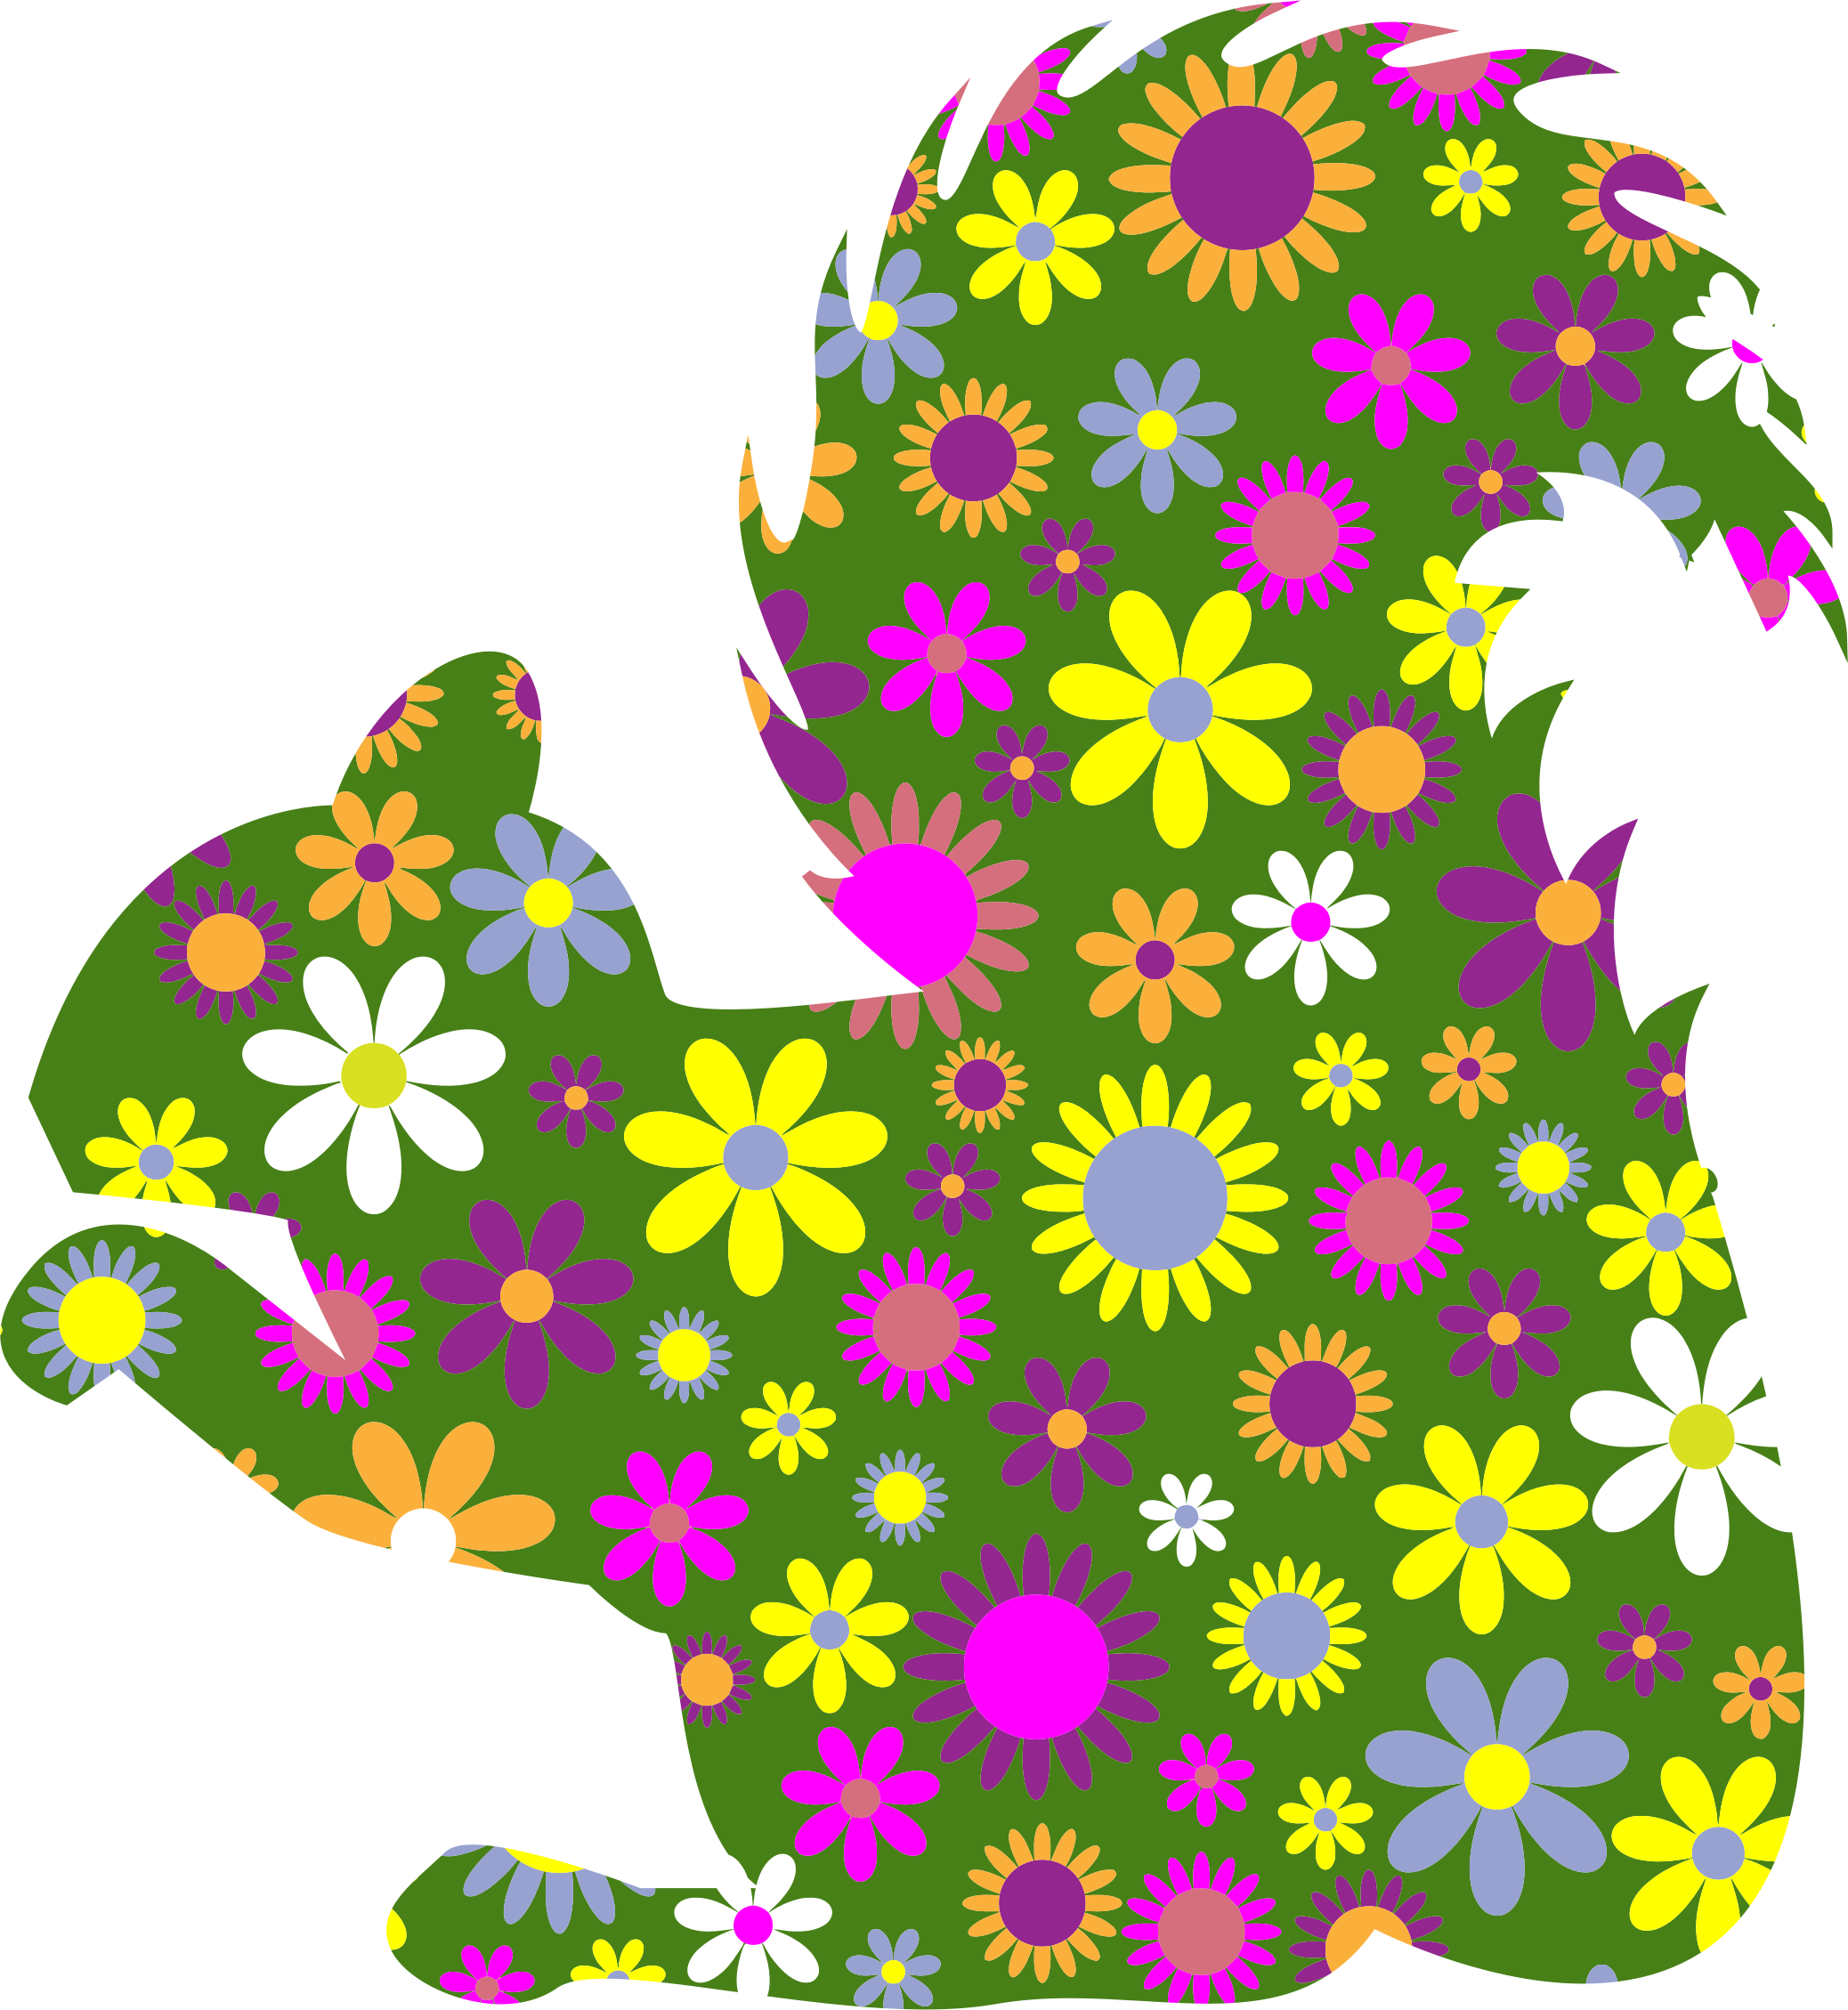 clipart squirrel whimsical